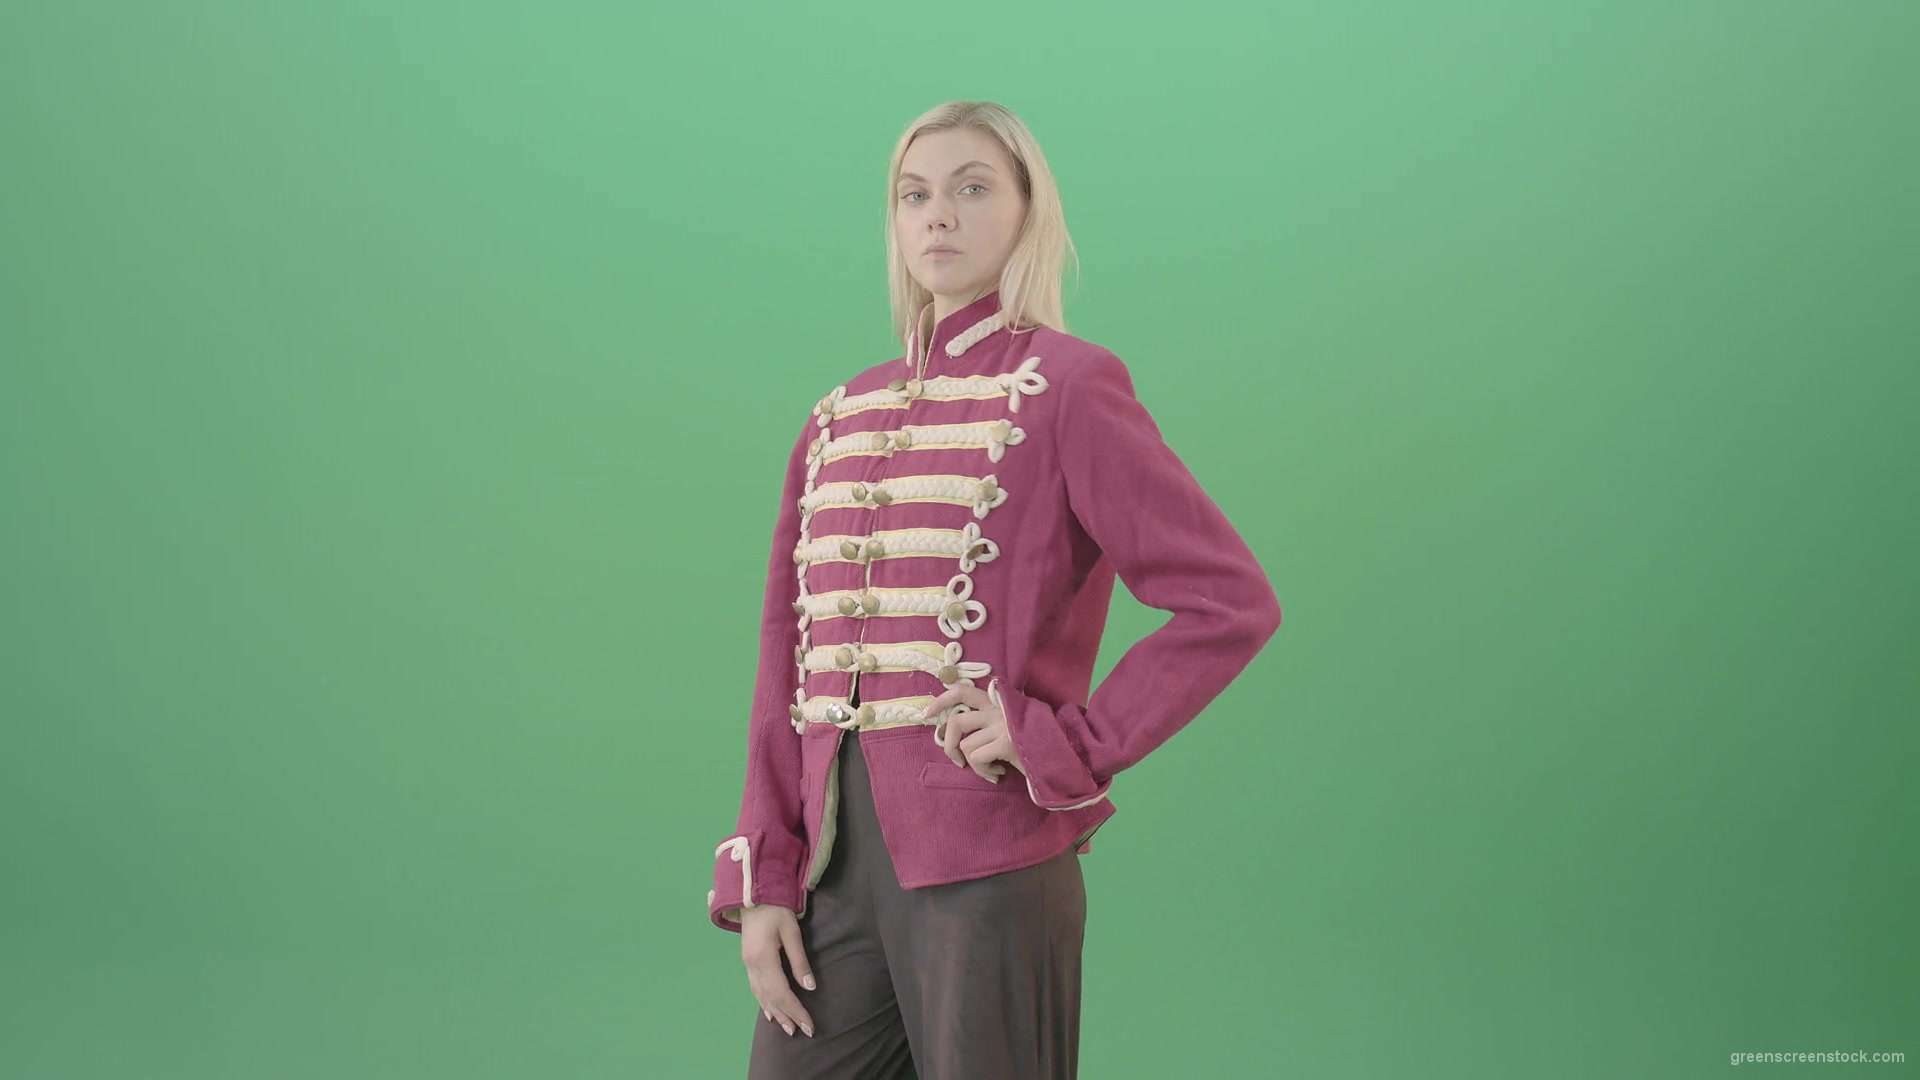 vj video background Blonde-Girl-in-Imperial-Royal-uniform-posing-and-shows-photomodel-gestures-isolated-on-Green-Screen-4K-Video-Footage-1920_003